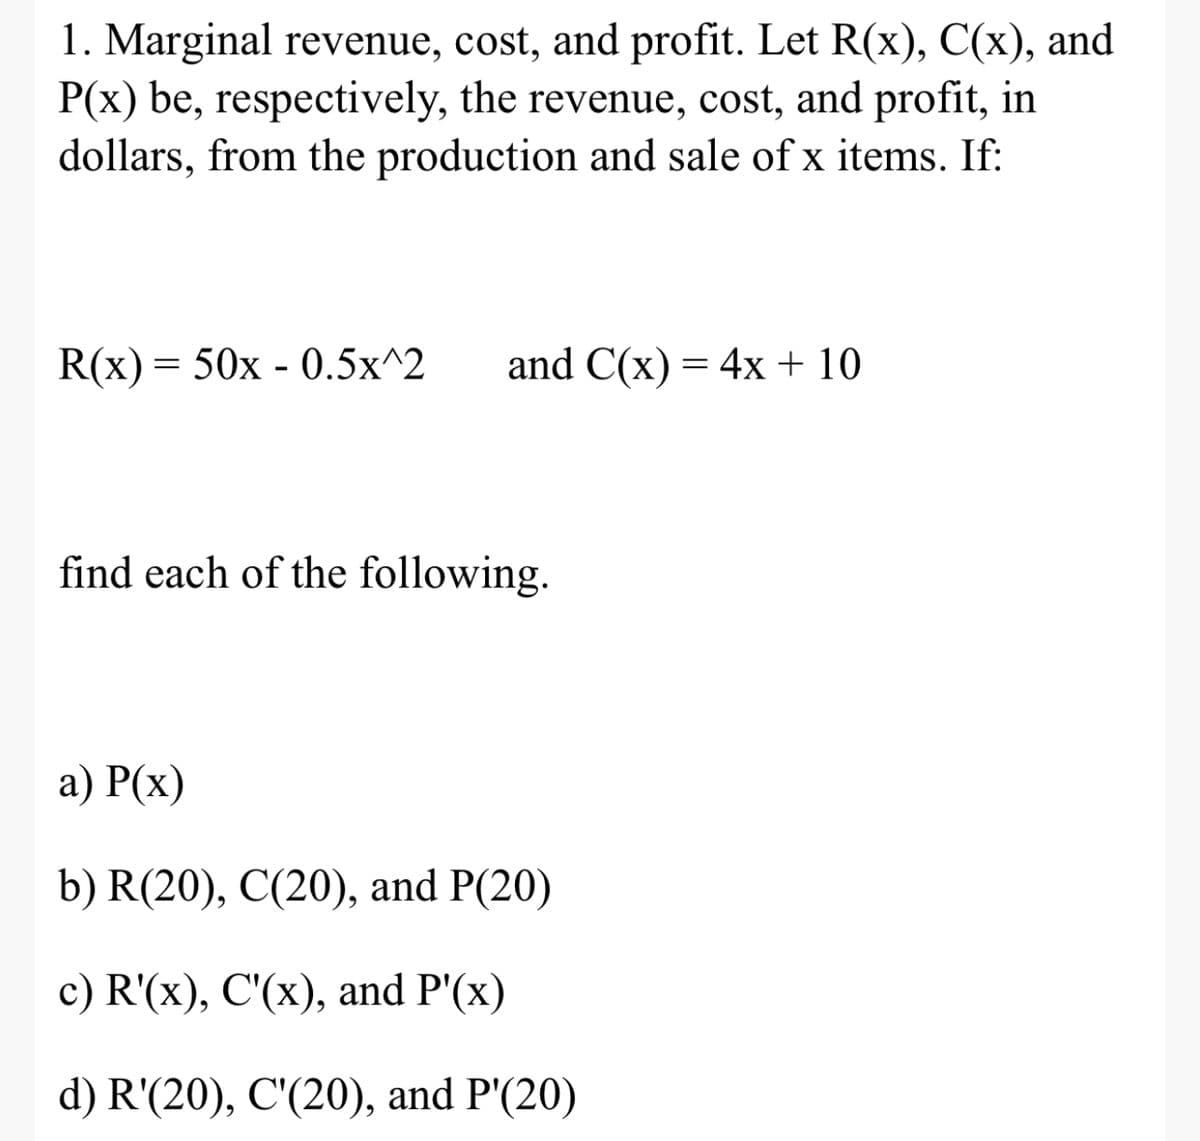 1. Marginal revenue, cost, and profit. Let R(x), C(x), and
P(x) be, respectively, the revenue, cost, and profit, in
dollars, from the production and sale of x items. If:
R(x) = 50x - 0.5x^2
and C(x) = 4x + 10
find each of the following.
а) Р(х)
b) R(20), C(20), and P(20)
c) R'(x), C'(x), and P'(x)
d) R'(20), C'(20), and P'(20)
